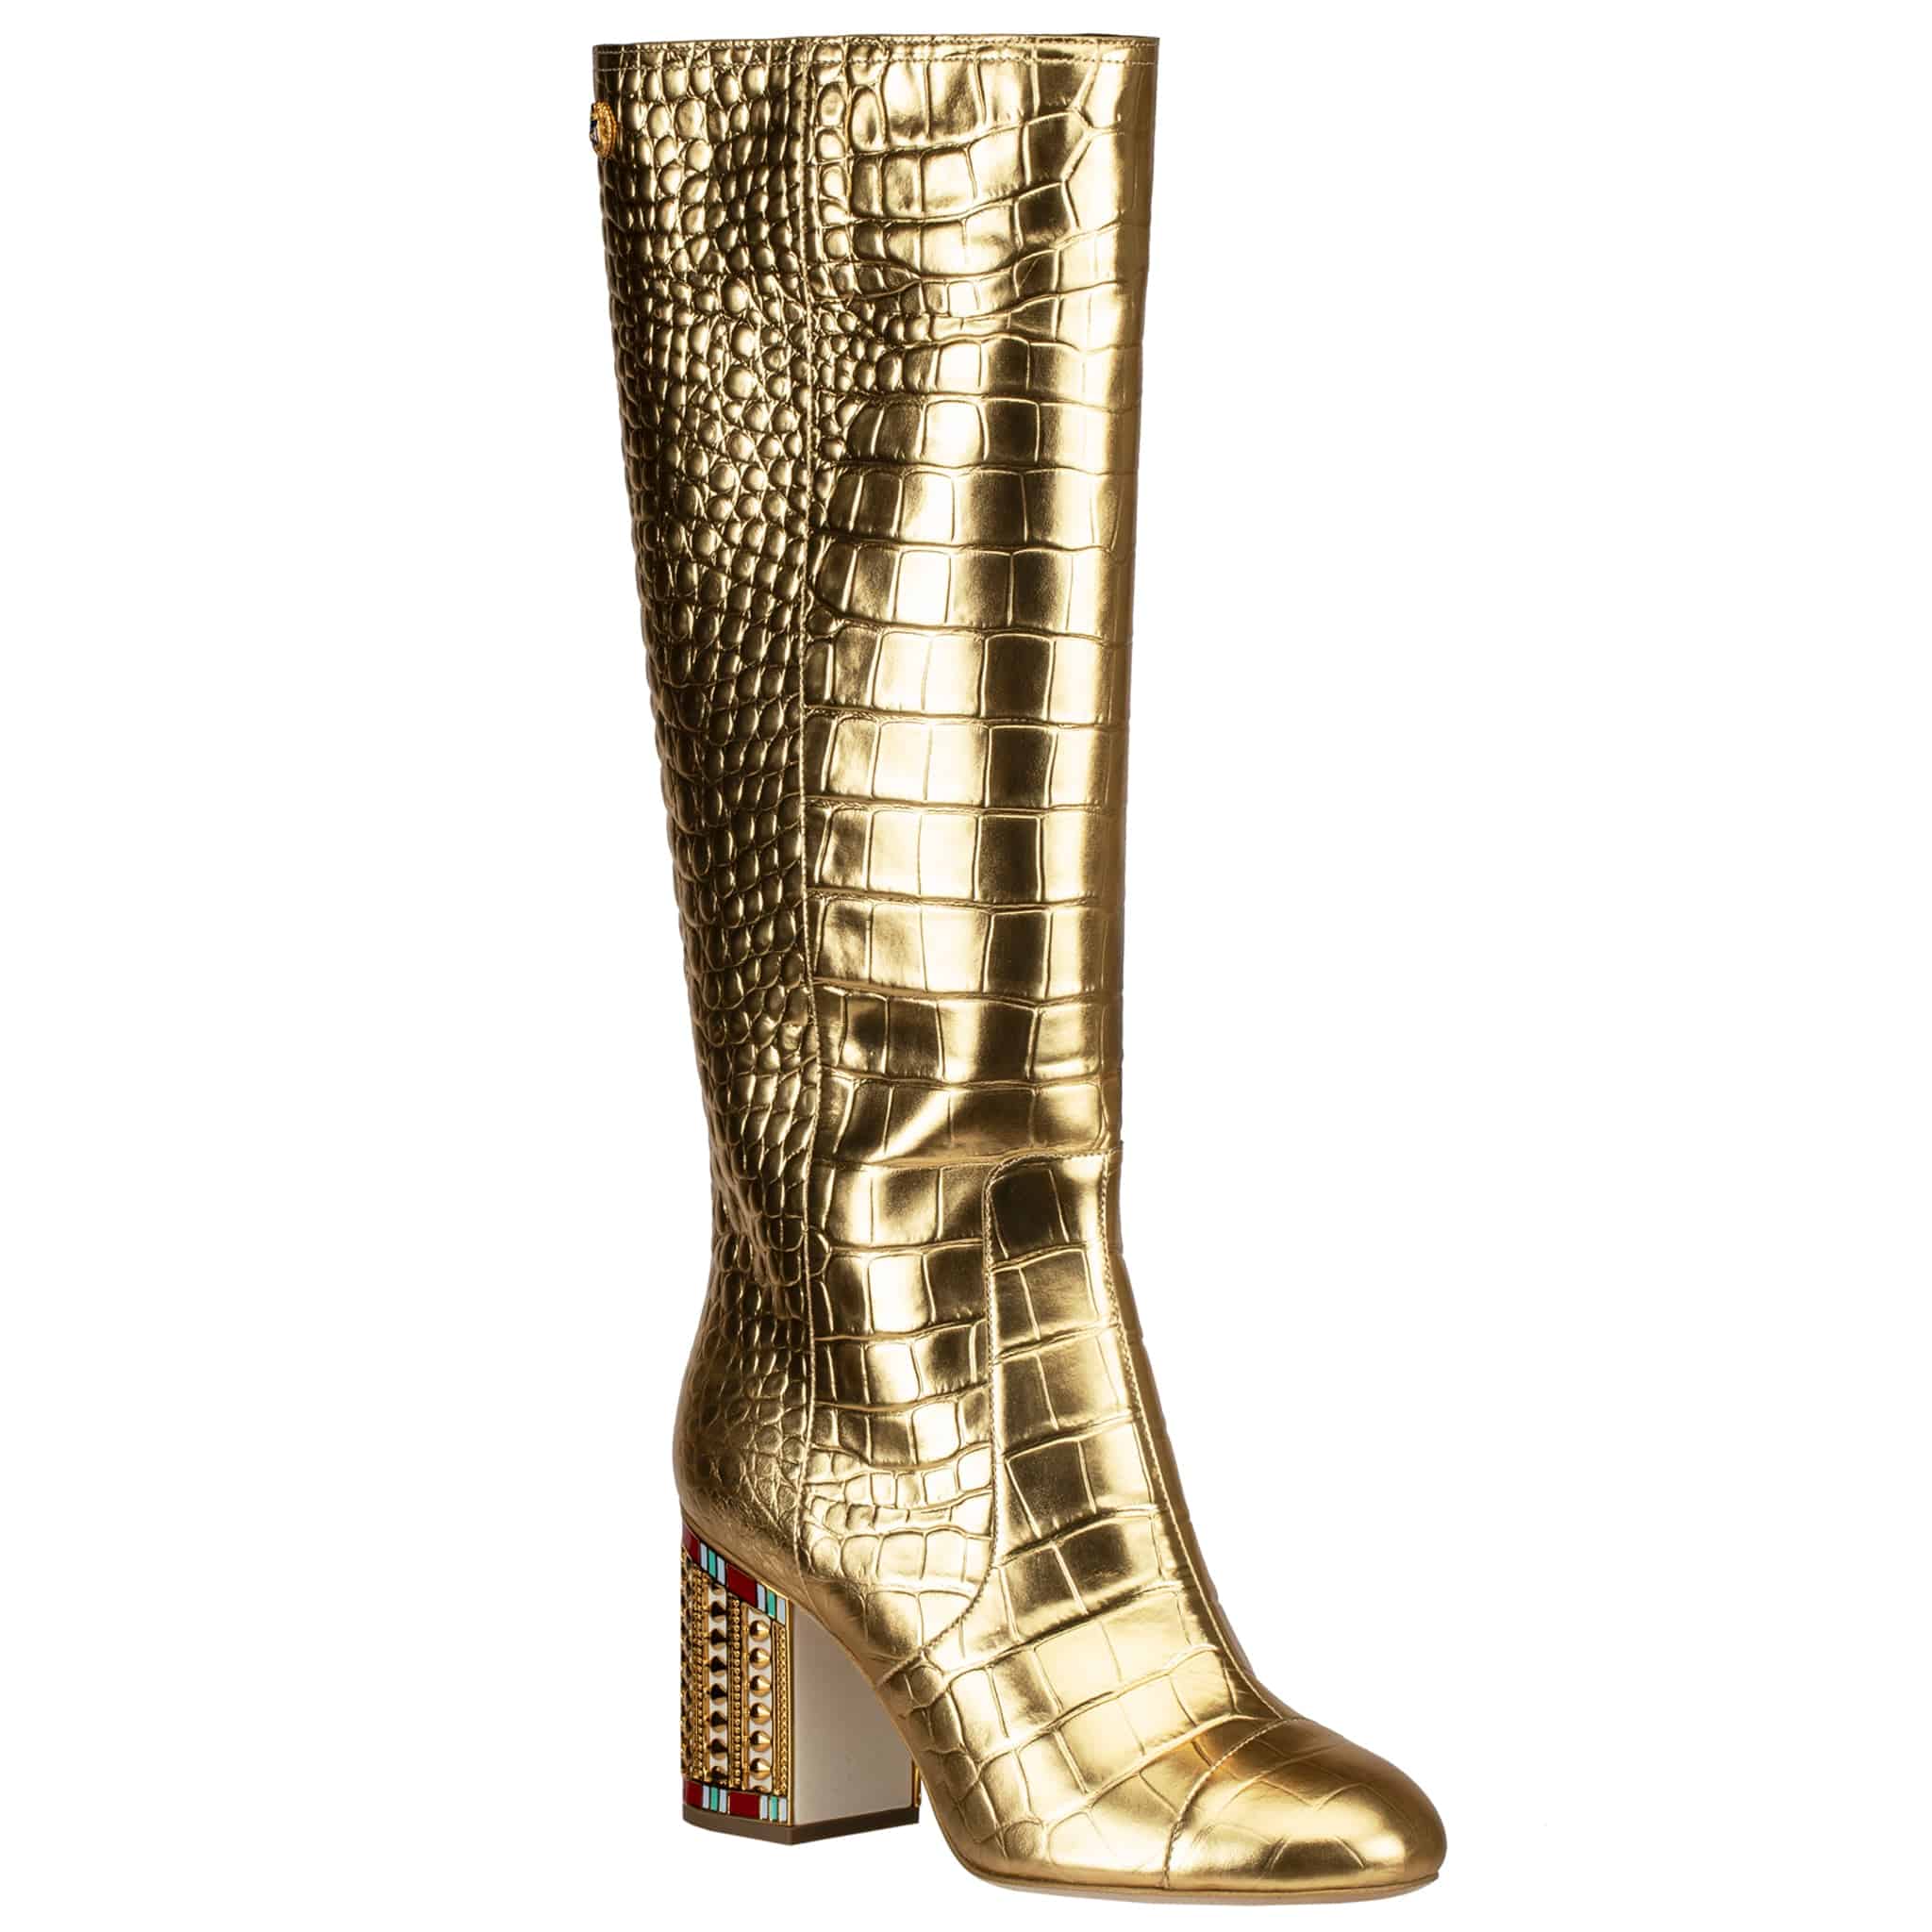 CHANEL PHARAOH TREASURE METALLIC GOLD CROCODILE EMBOSSED LEATHER HIGH BOOTS 39 FR - On Repeat